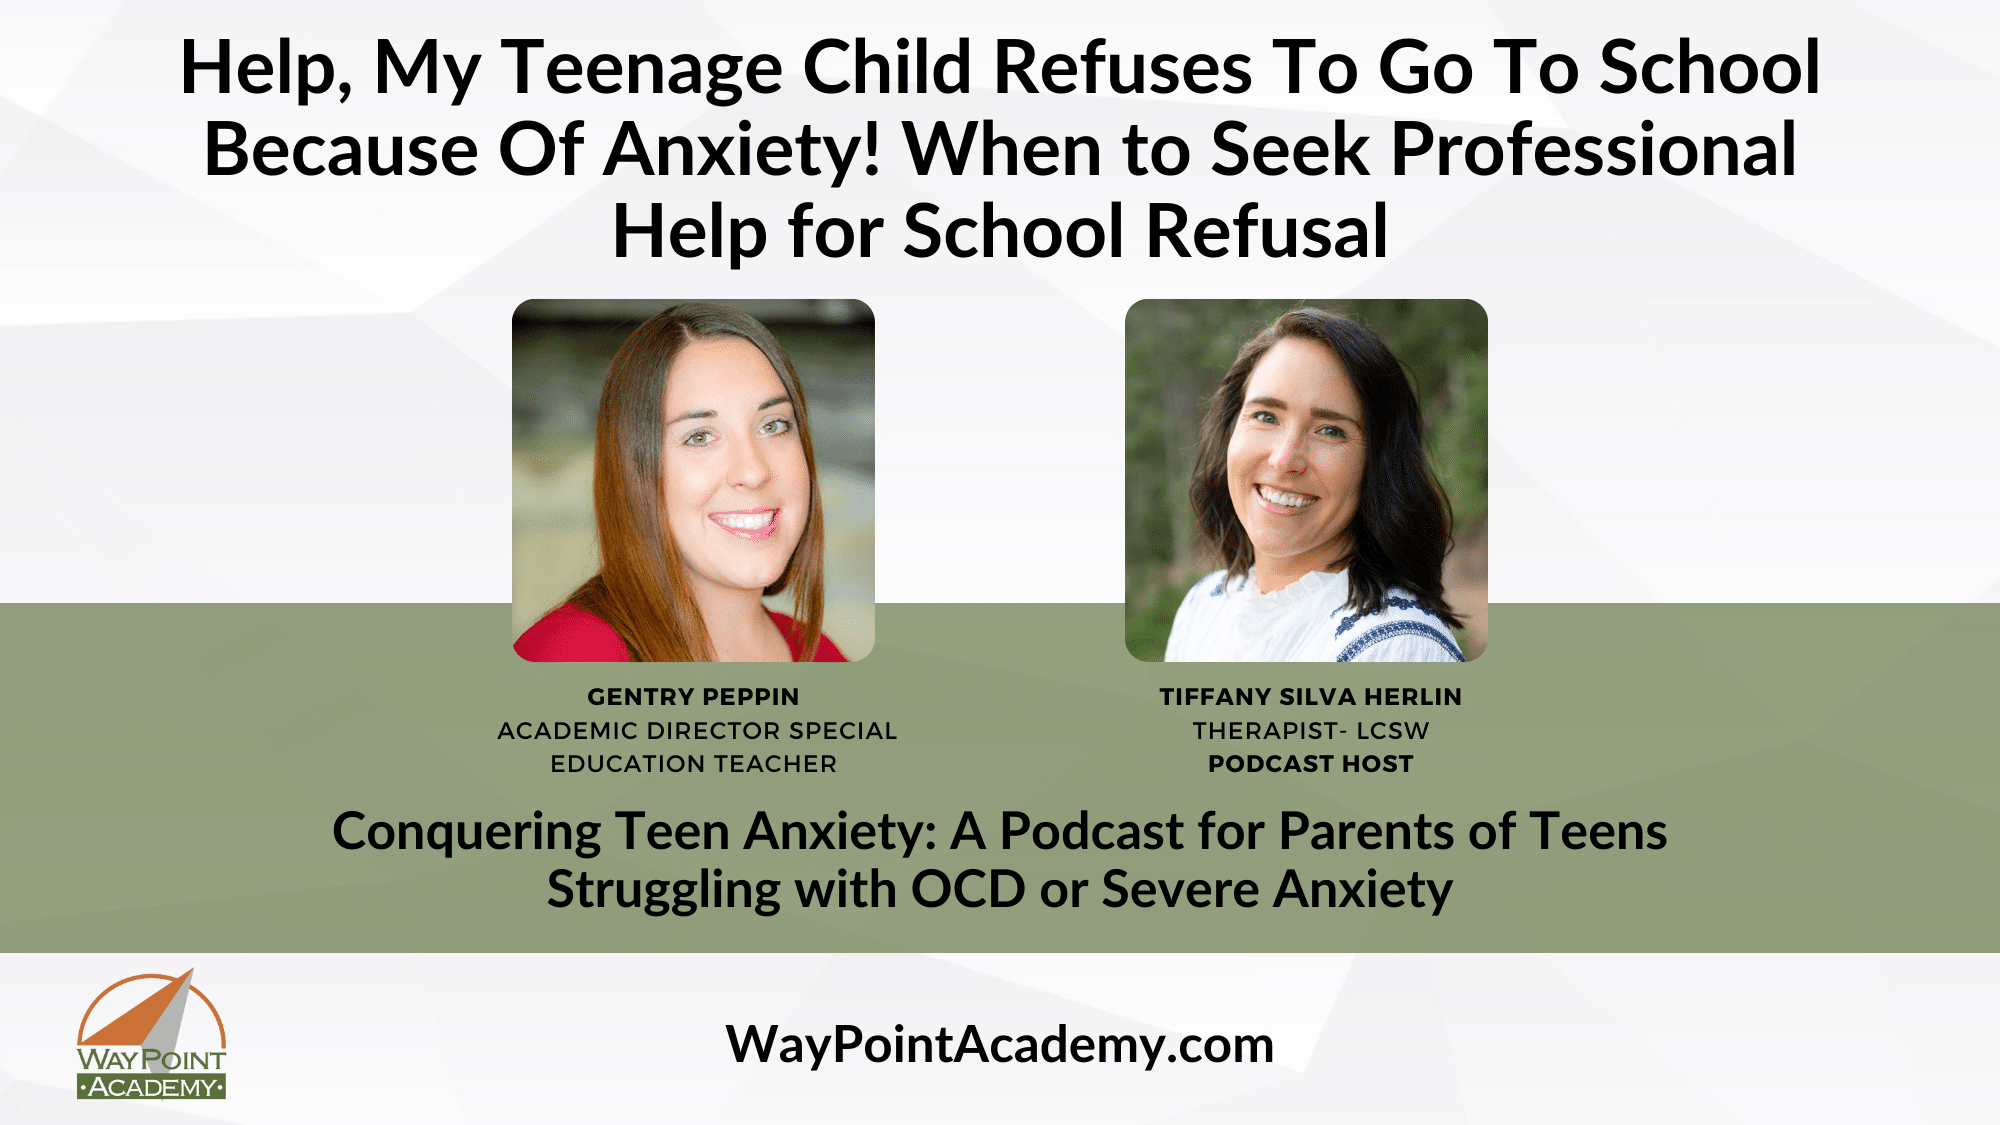 An image promoting WayPoint Academy's Podcast on School Refusal. This Episode is called, "Help, My Teenage Child Refuses To Go To School Because Of Anxiety! When to Seek Professional Help for School Refusal"